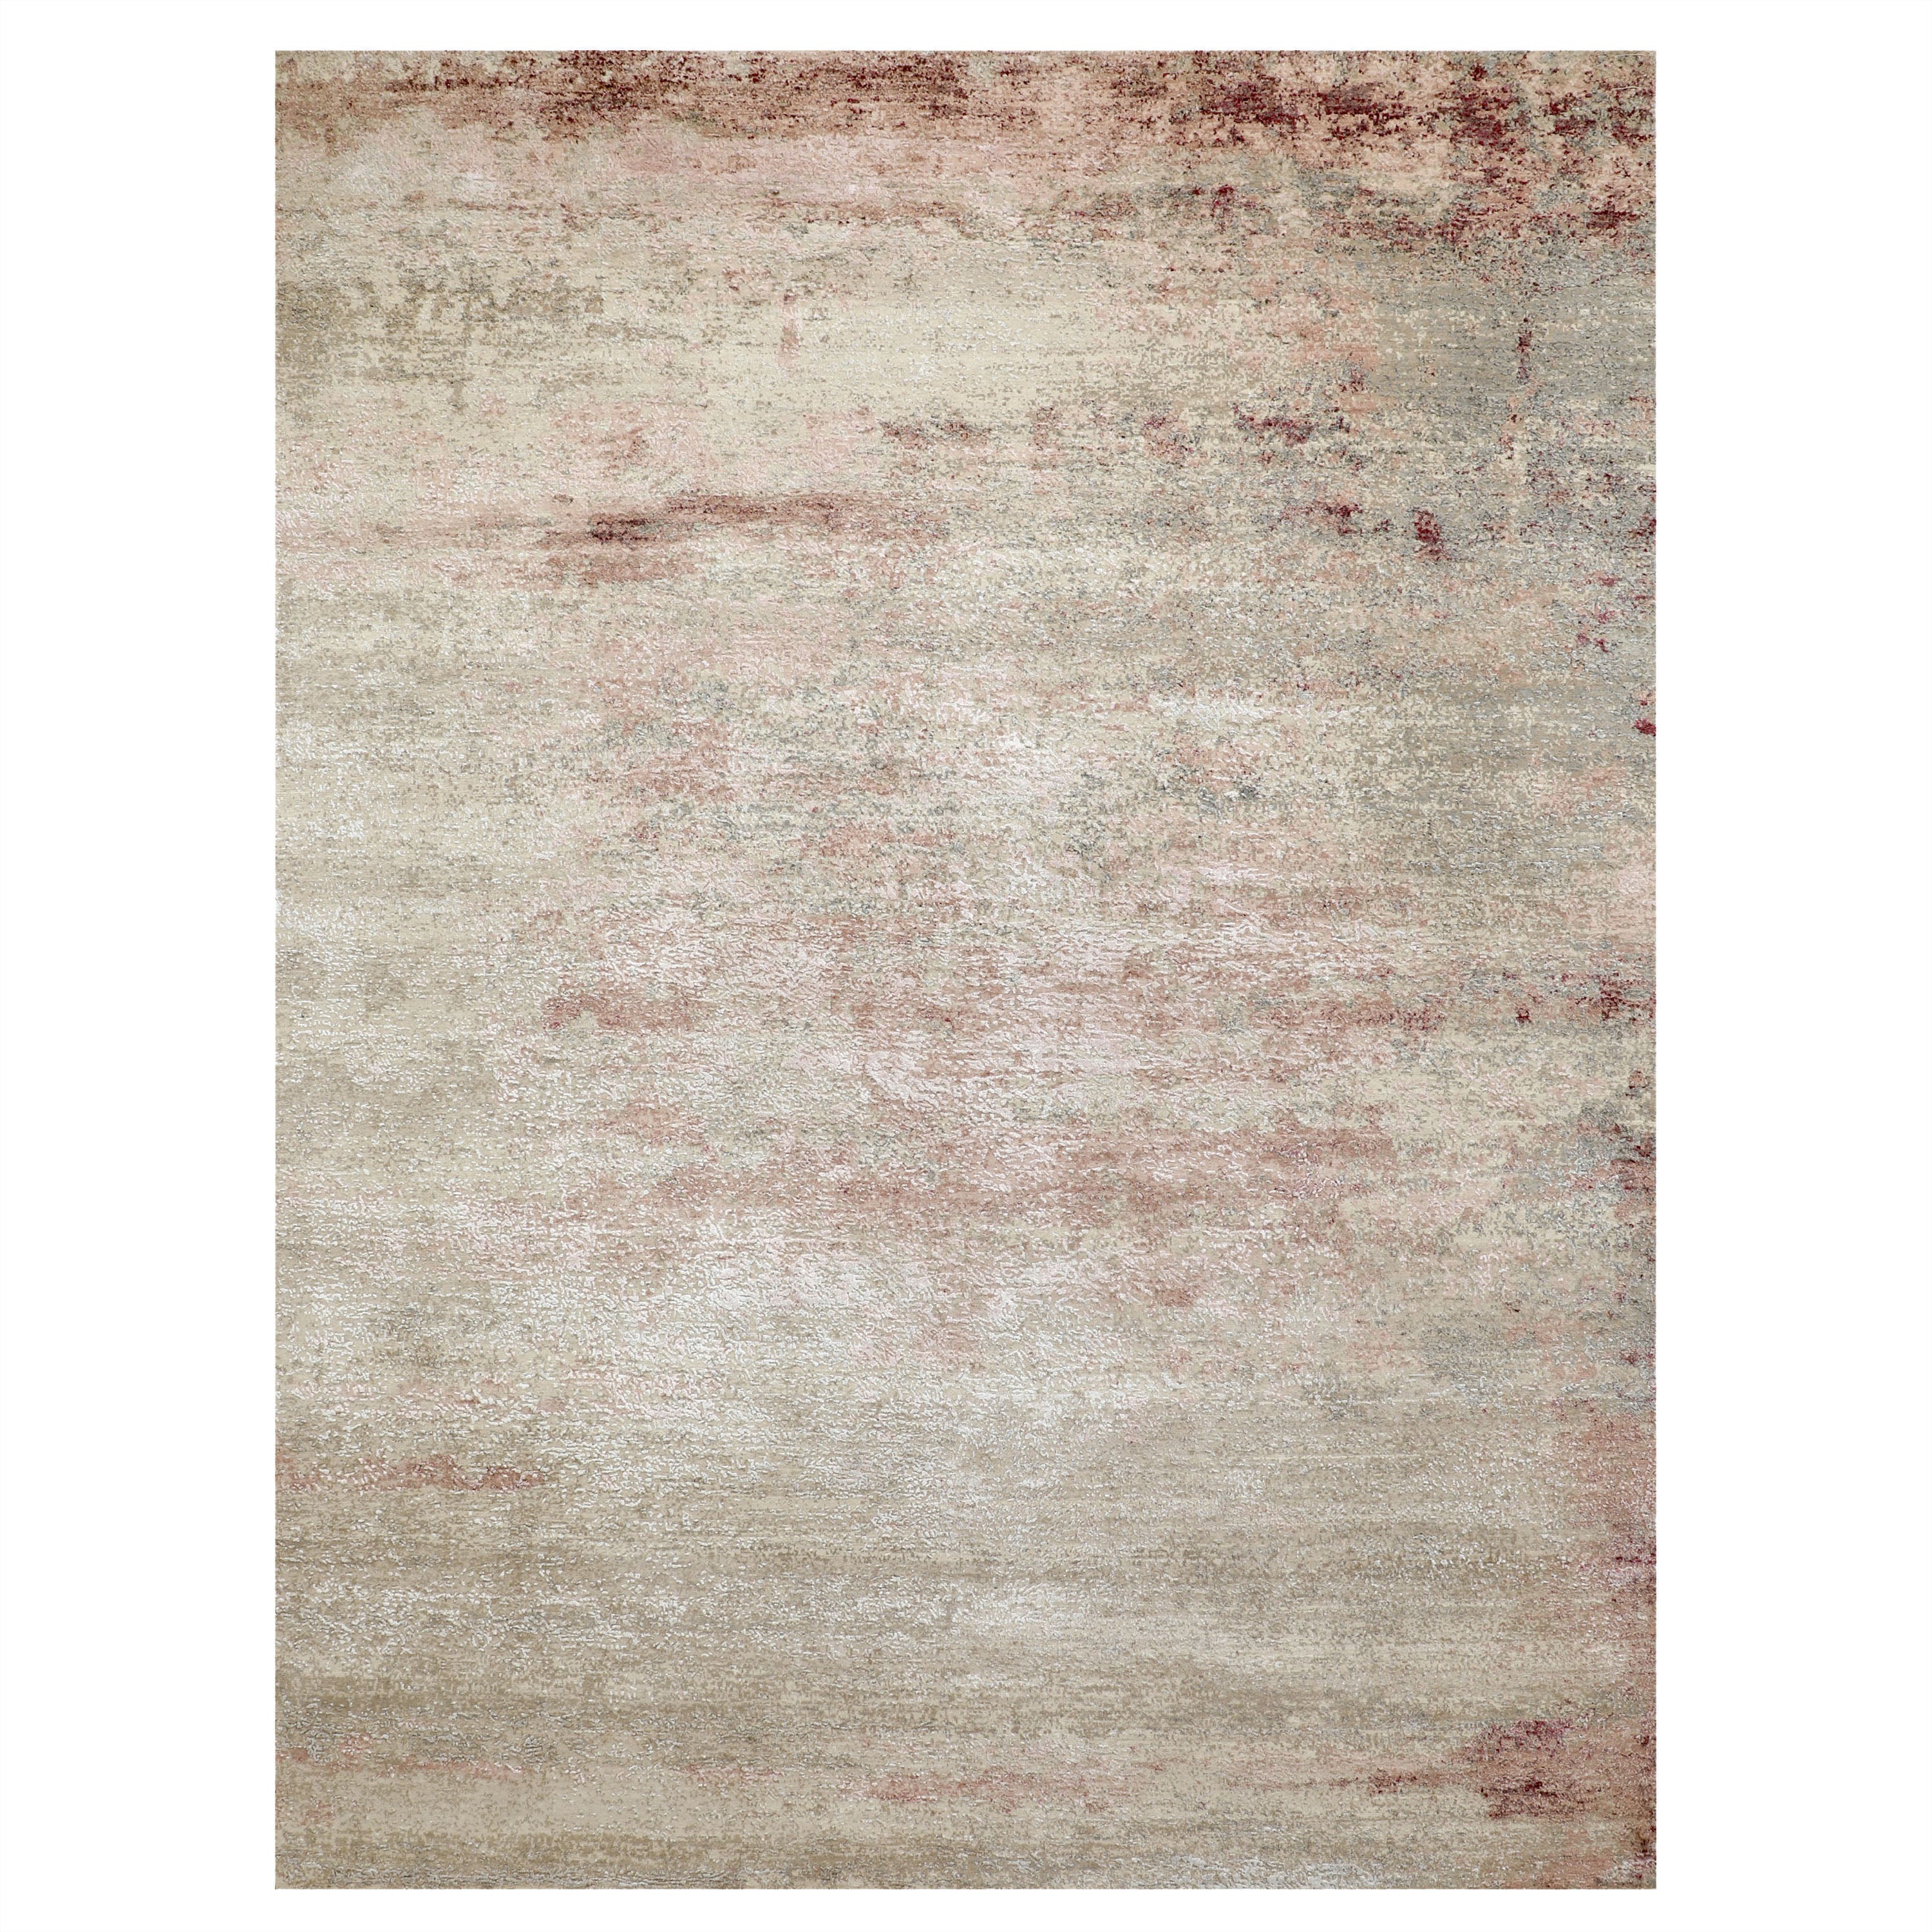 Beige and Pink Transitional Wool Silk Blend Rug - 9' x 12'2"